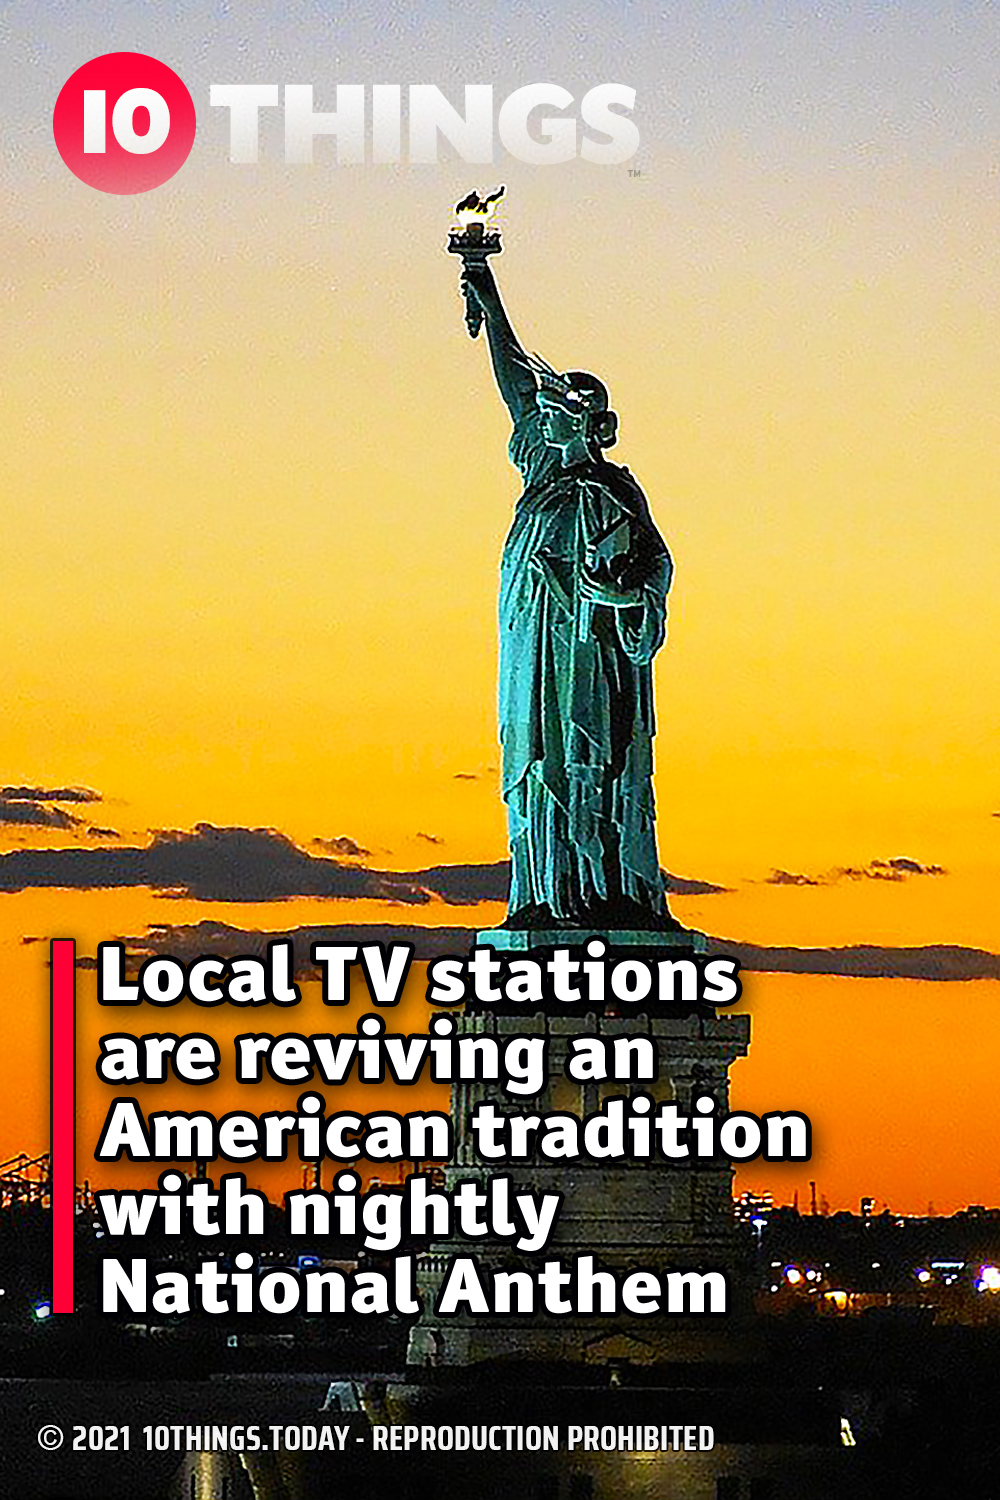 Local TV stations are reviving an American tradition with nightly National Anthem